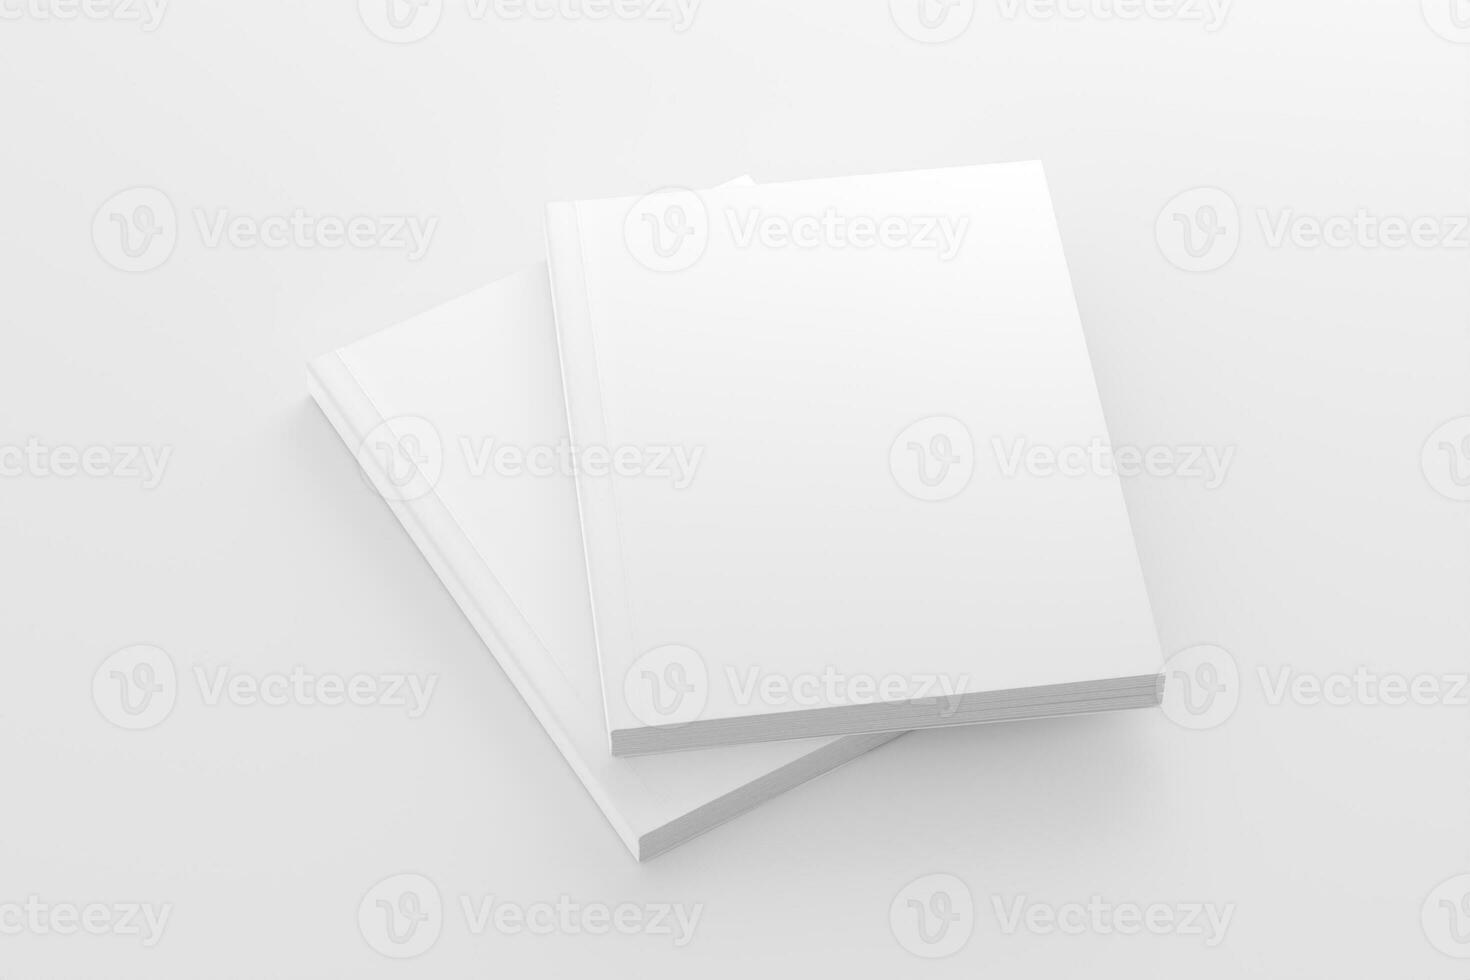 US Letter Softcover Book Cover White Blank Mockup photo